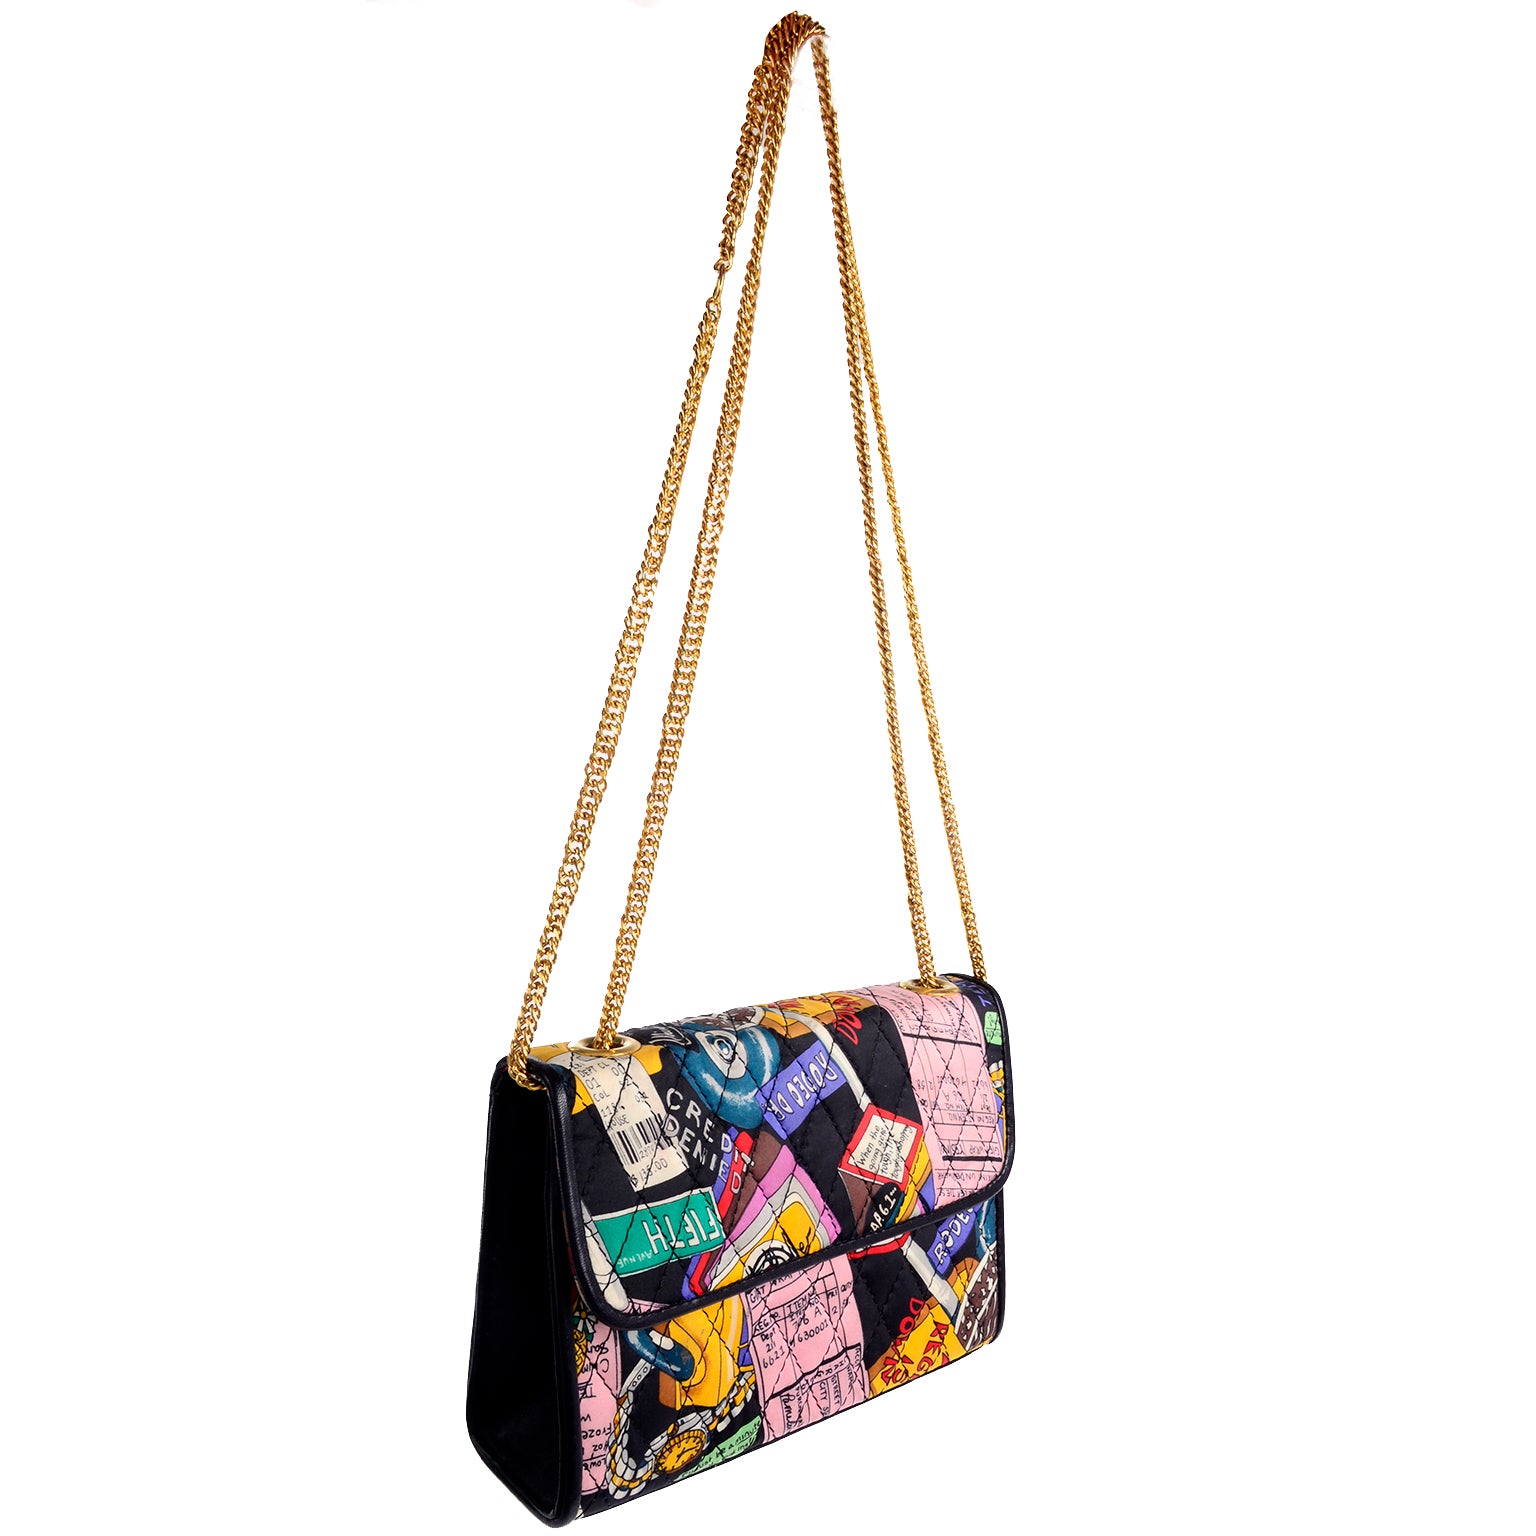 Quilted Nicole Miller Vintage Novelty Handbag With Shopaholic Theme